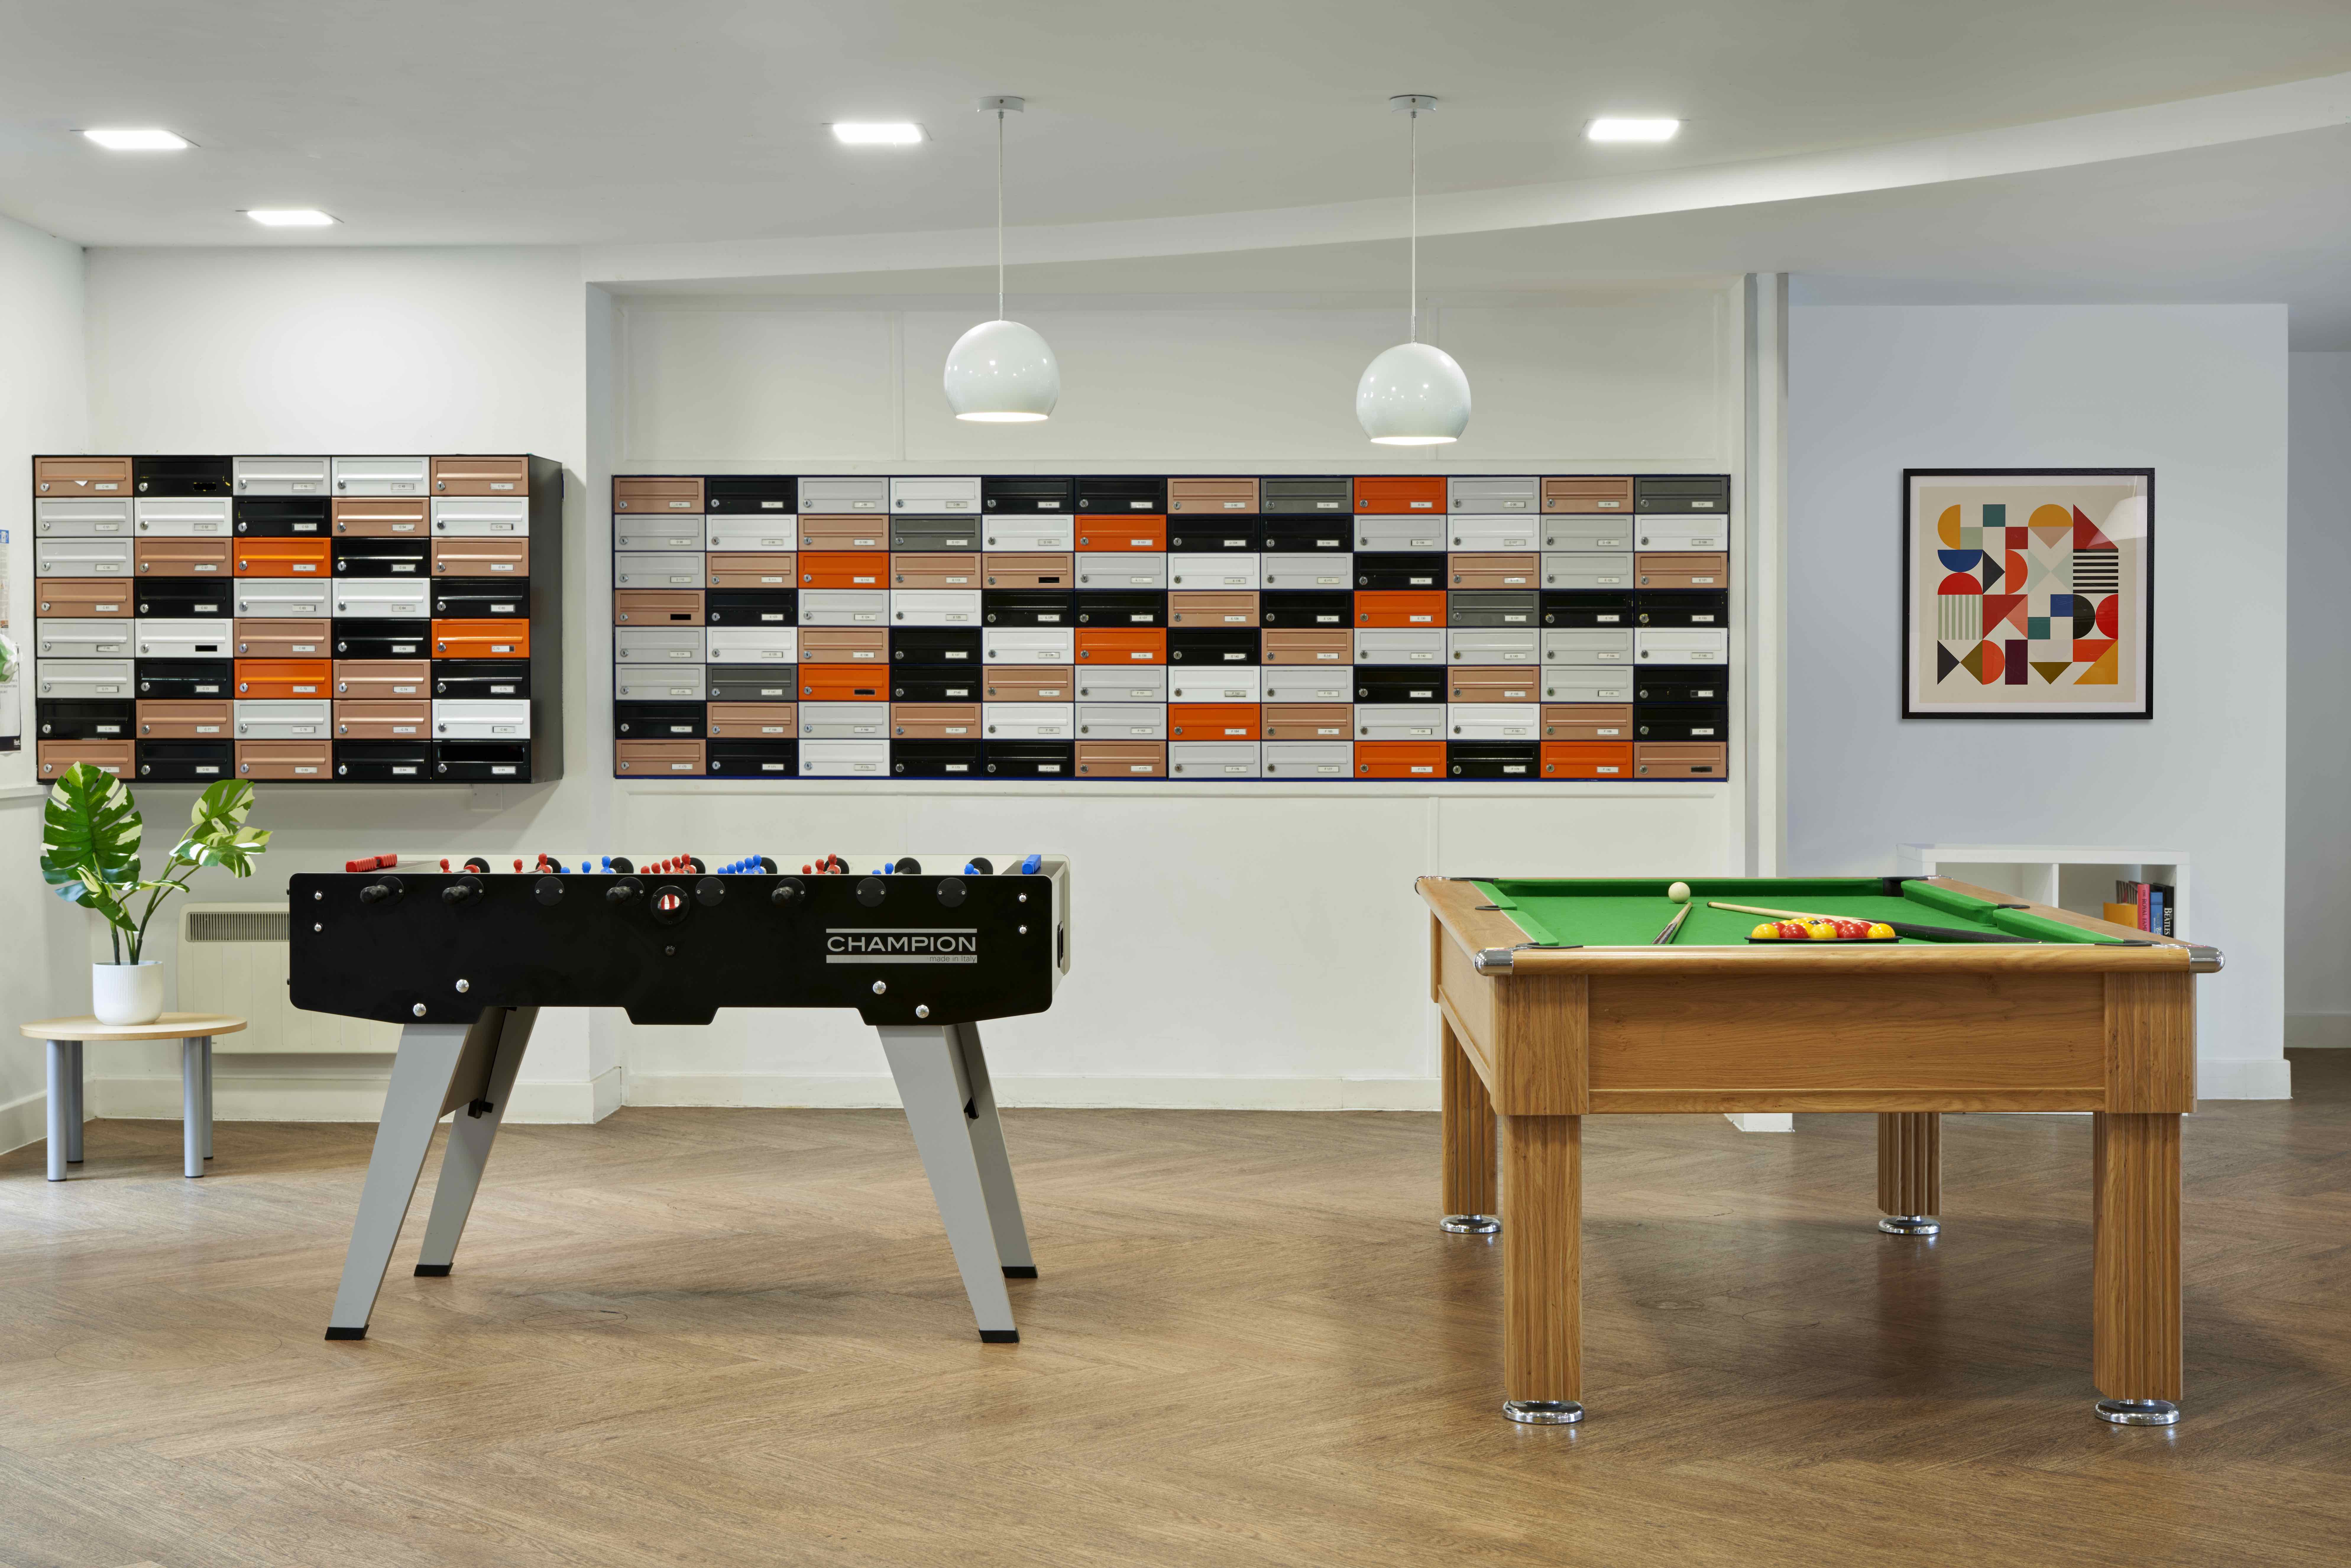 Sheffield student accommodation Games Area